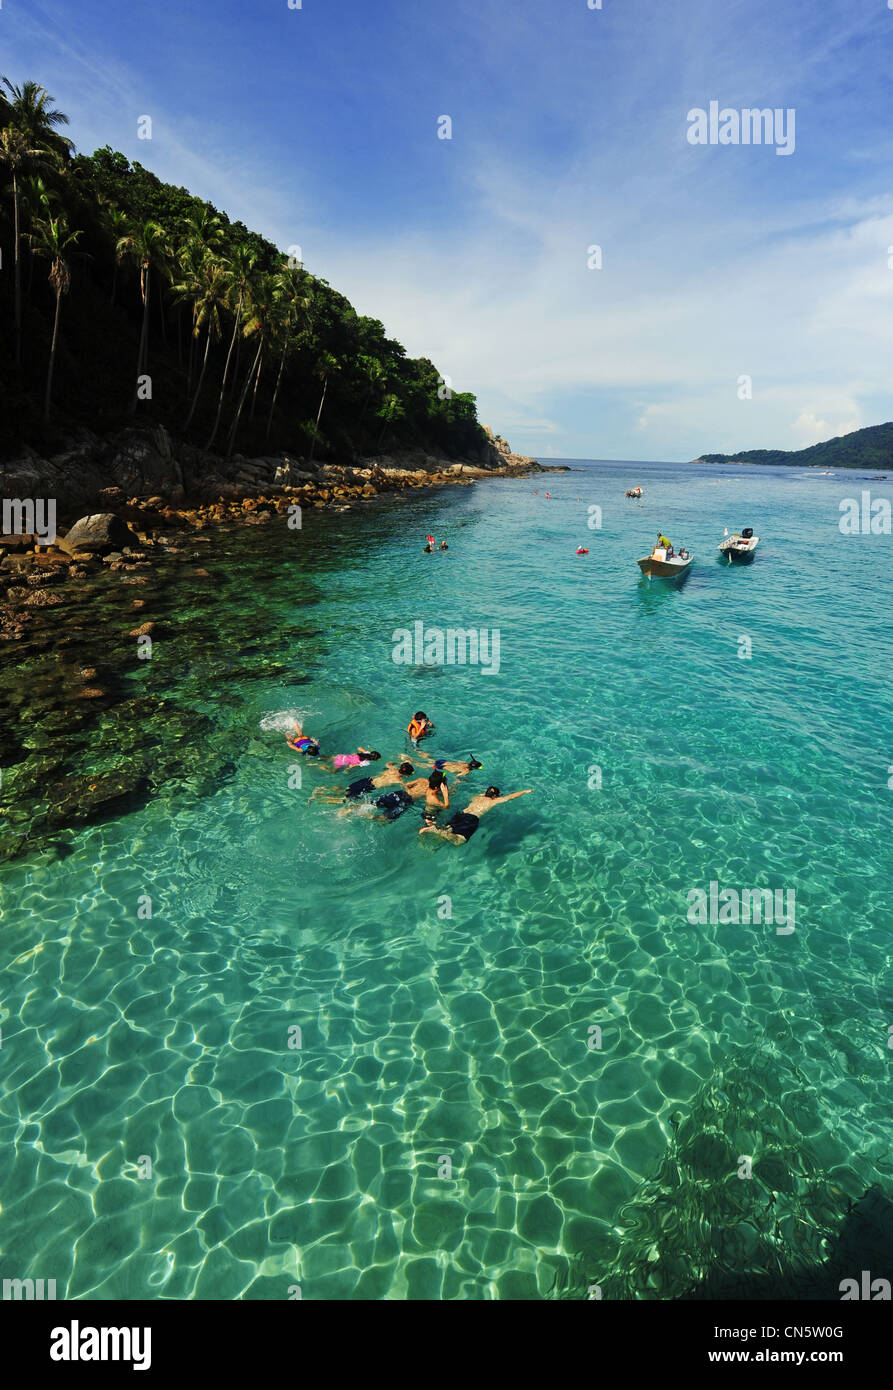 Malaysia, Terengganu State, Perhentian Islands, Perhentian Kecil, tourists snorkling in turquoise water Stock Photo